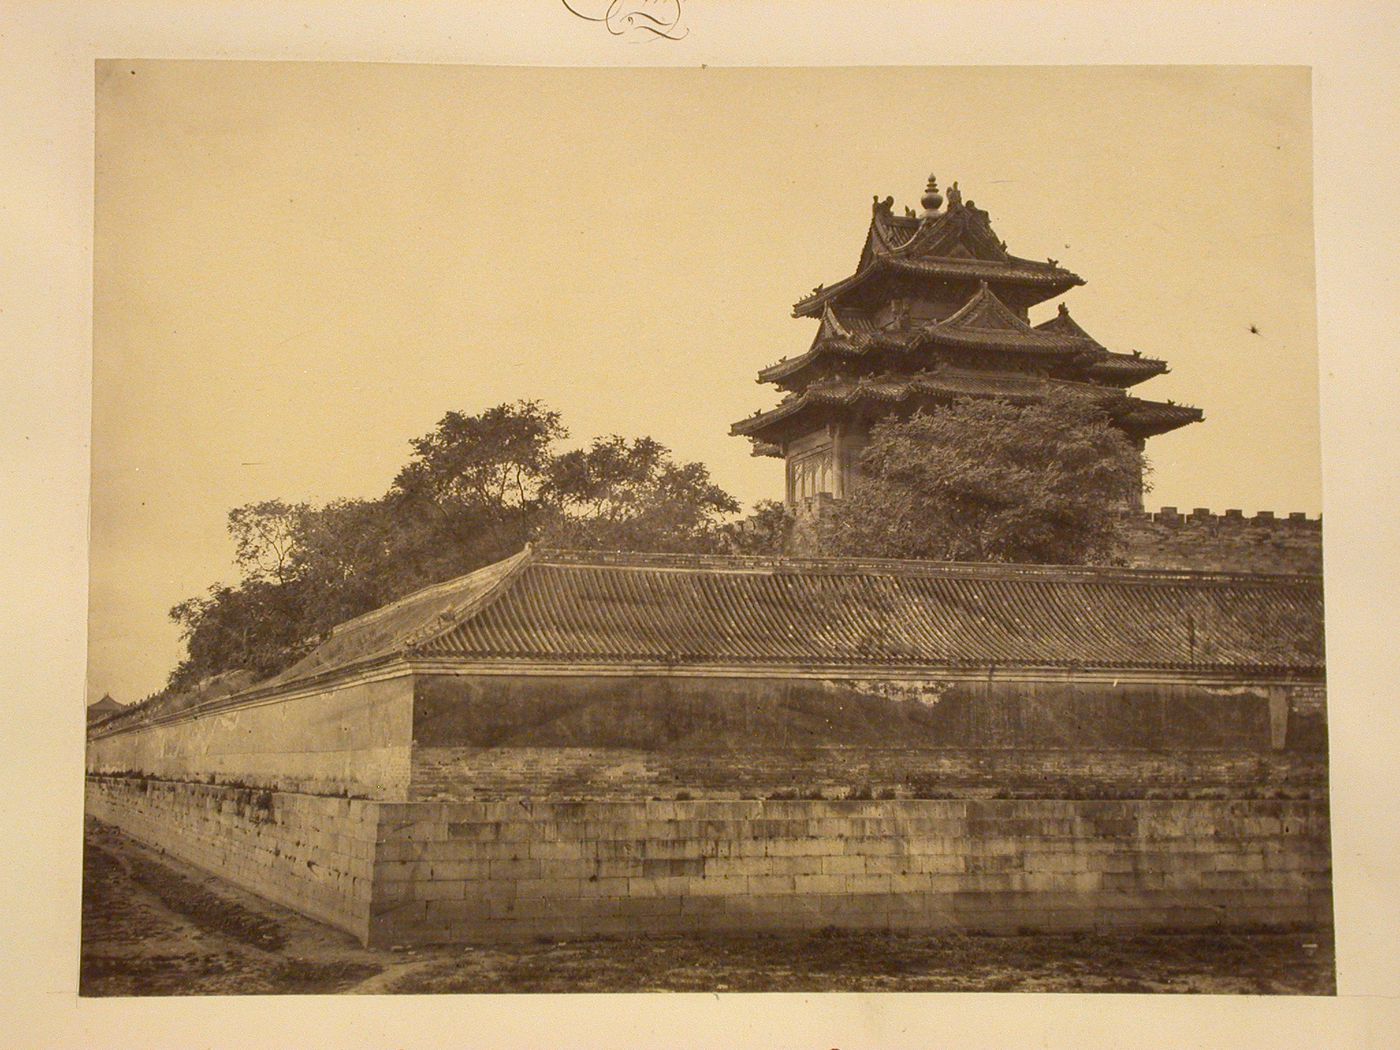 View of a corner tower of the Forbidden City from outside de wall, Peking (now Beijing), China